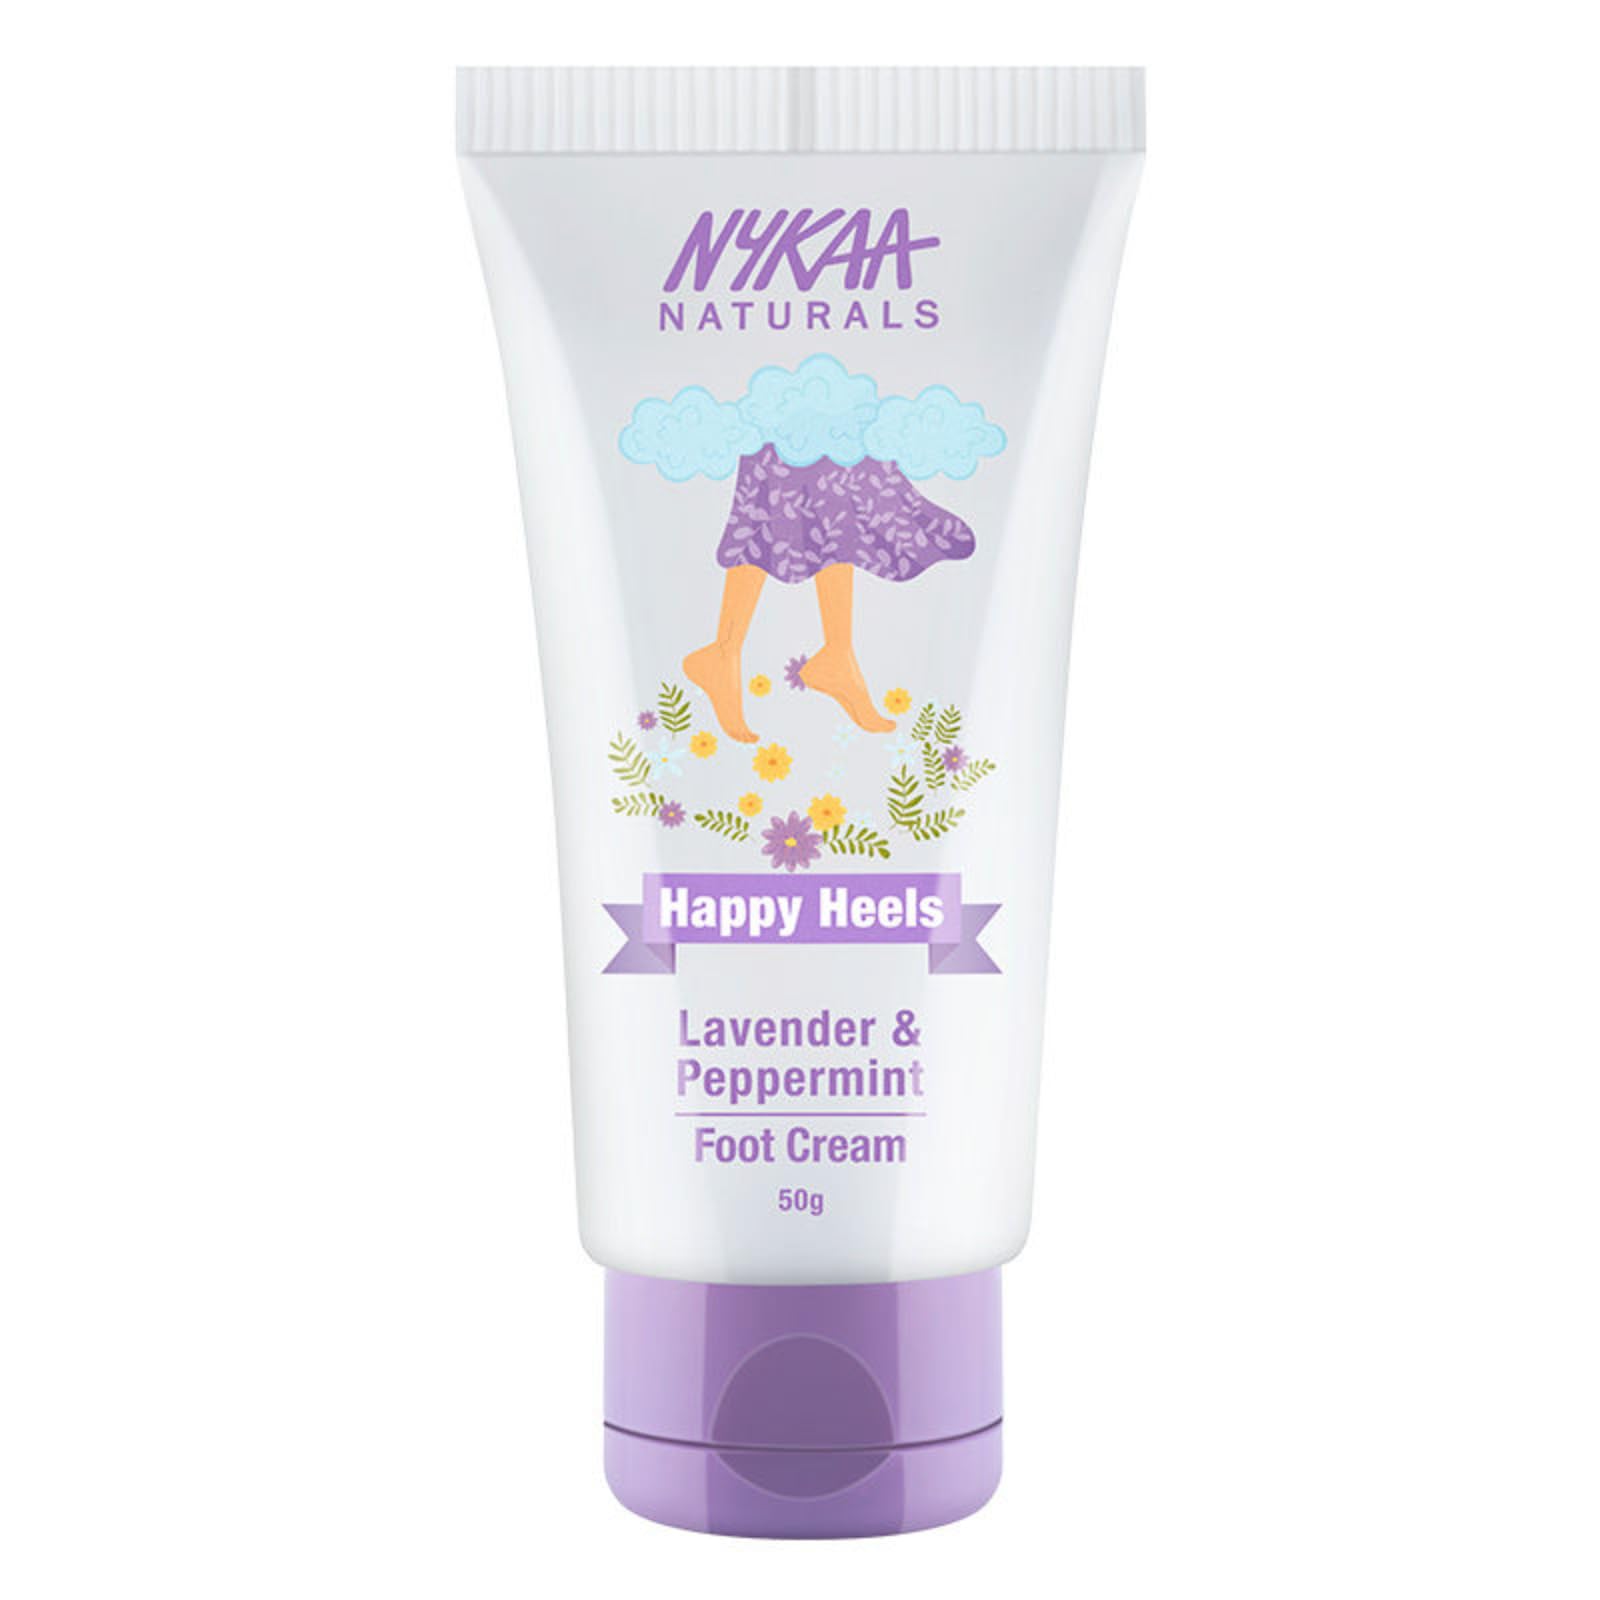 Nykaa Naturals Happy Heels Footcream - Non-Greasy Lotion - Exfoliates and Softens Rough Feet - Delicate Fragrance - Lavender and Peppermint - 1.7 oz